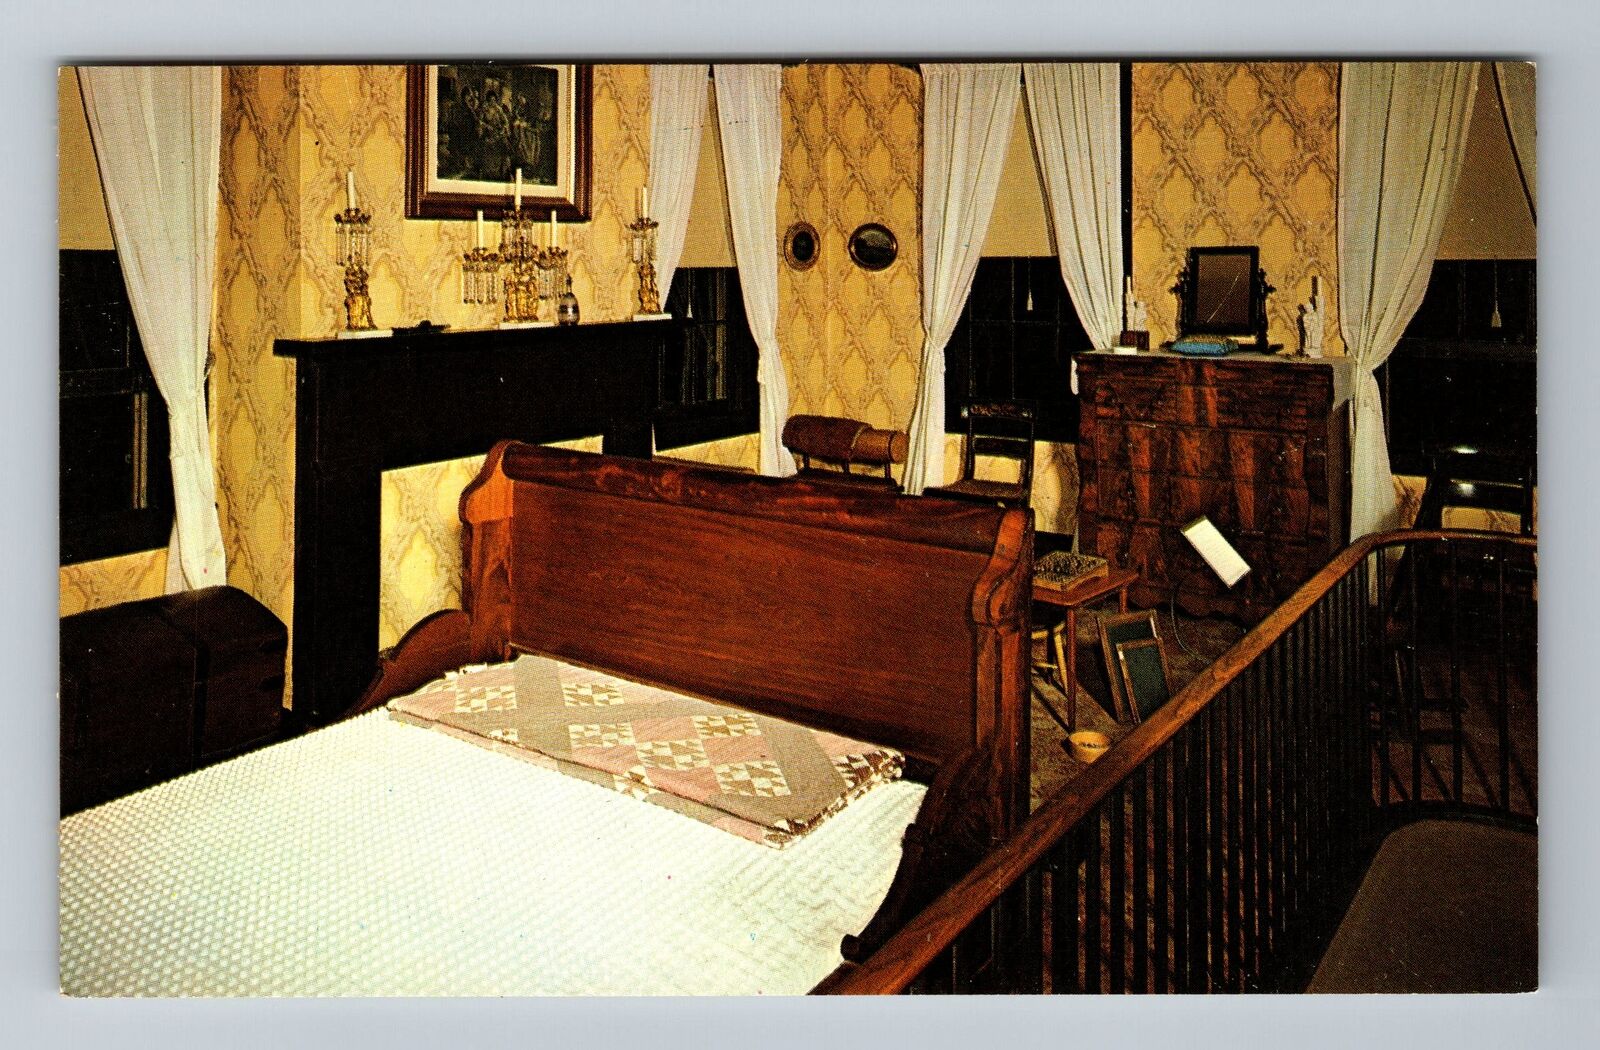 Springfield IL-Illinois, Guest Bedroom, Abraham Lincoln Home, Vintage Postcard